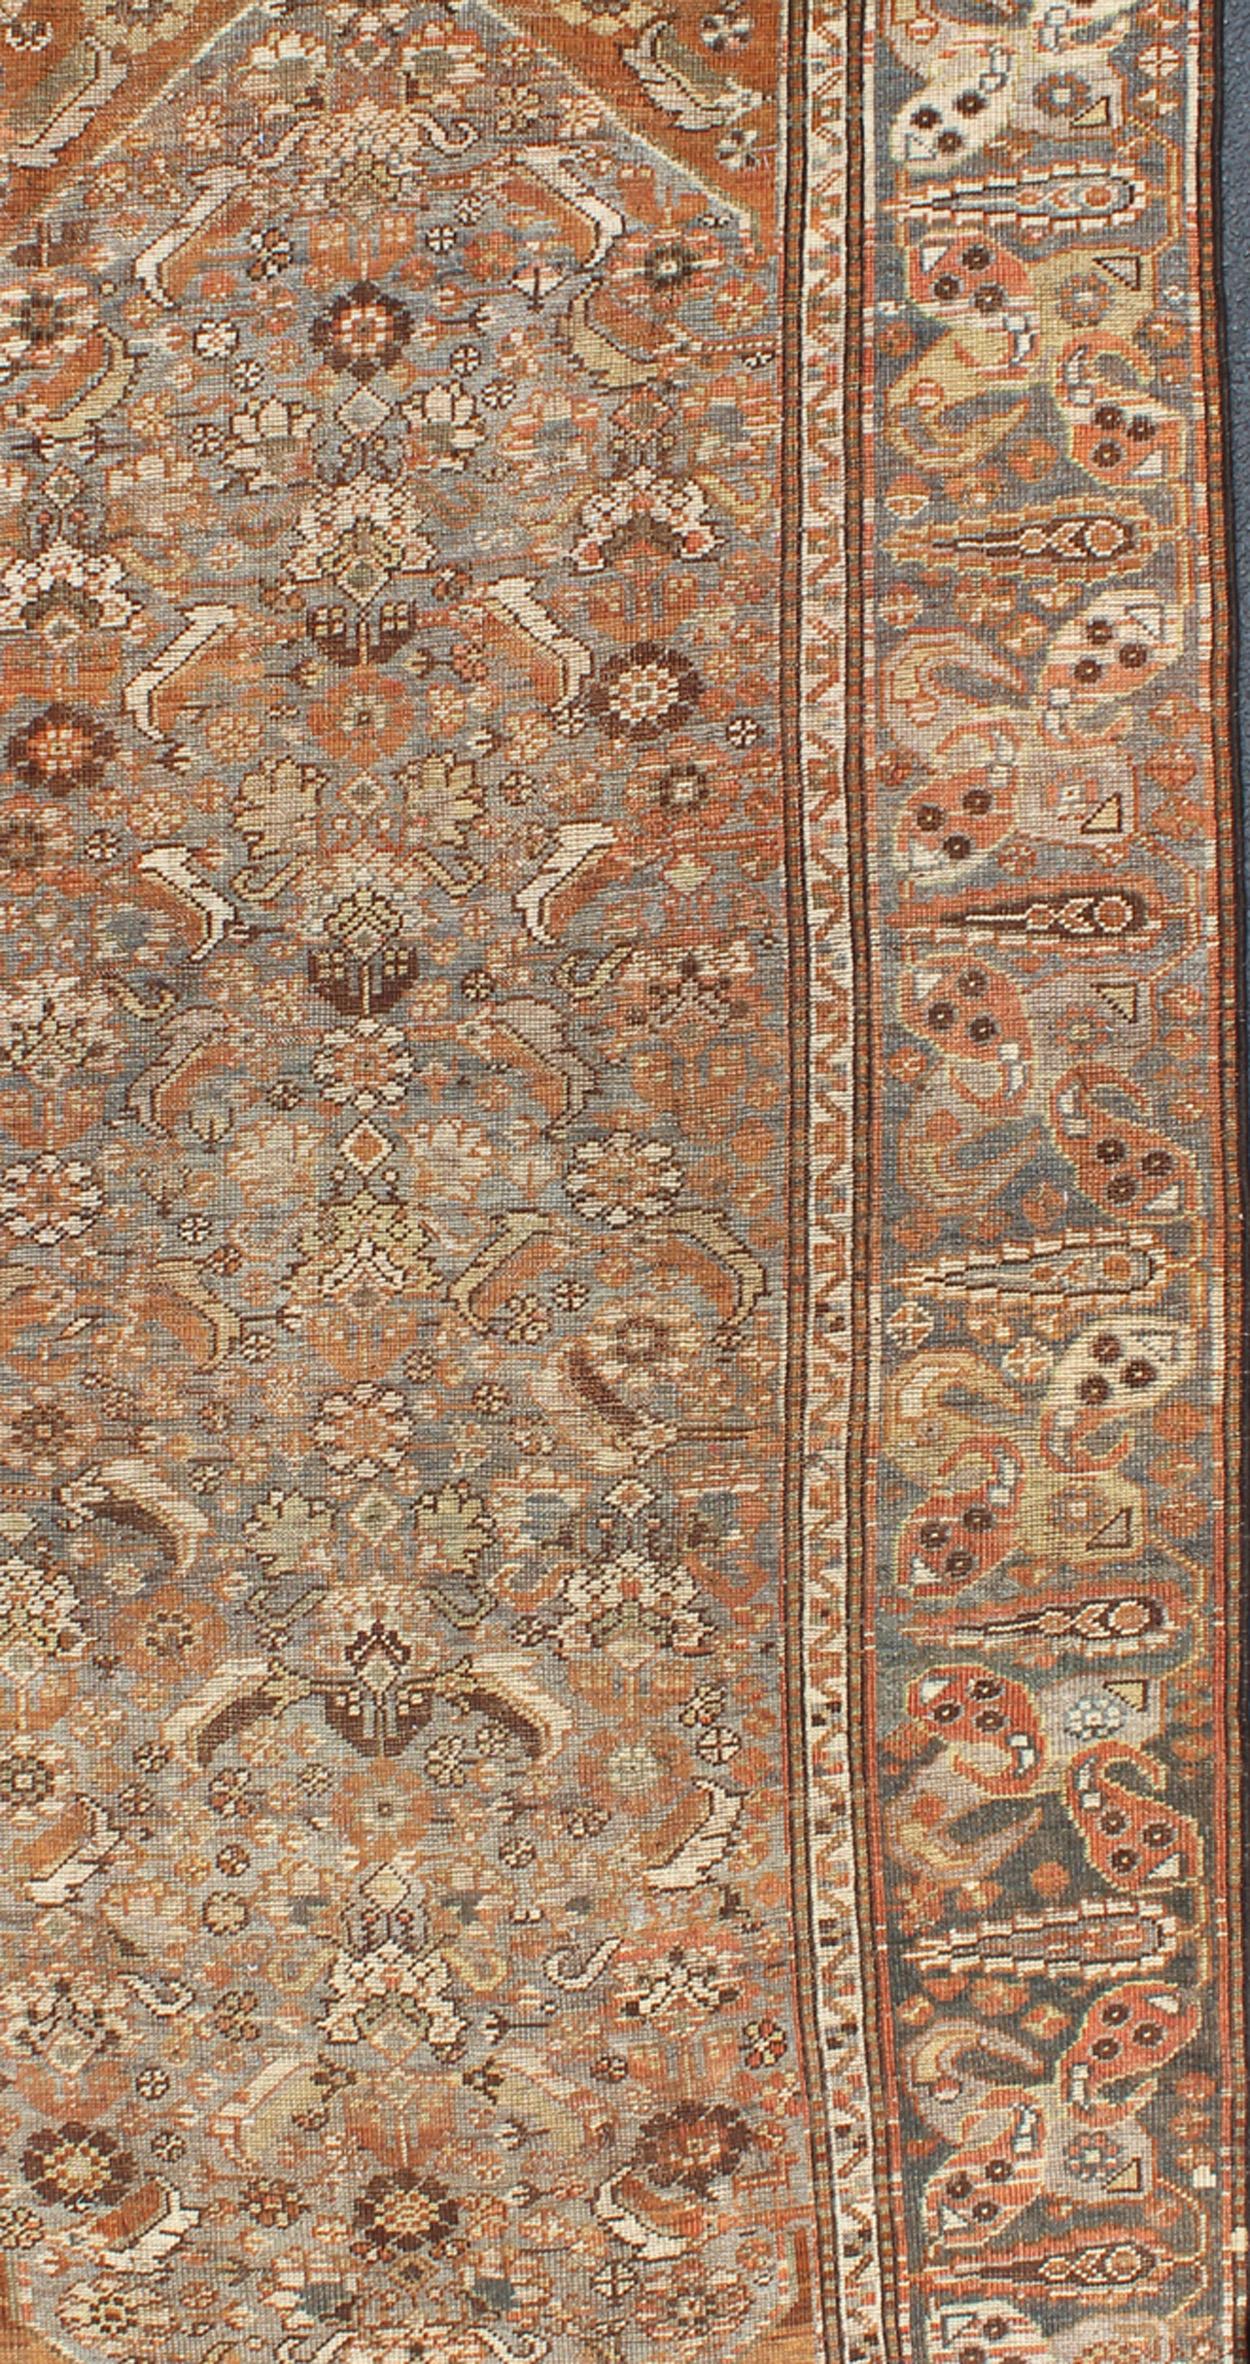 Hand-Knotted Antique Persian Qashqai Small Gallery Rug with Expansive Sub-Geometric Design